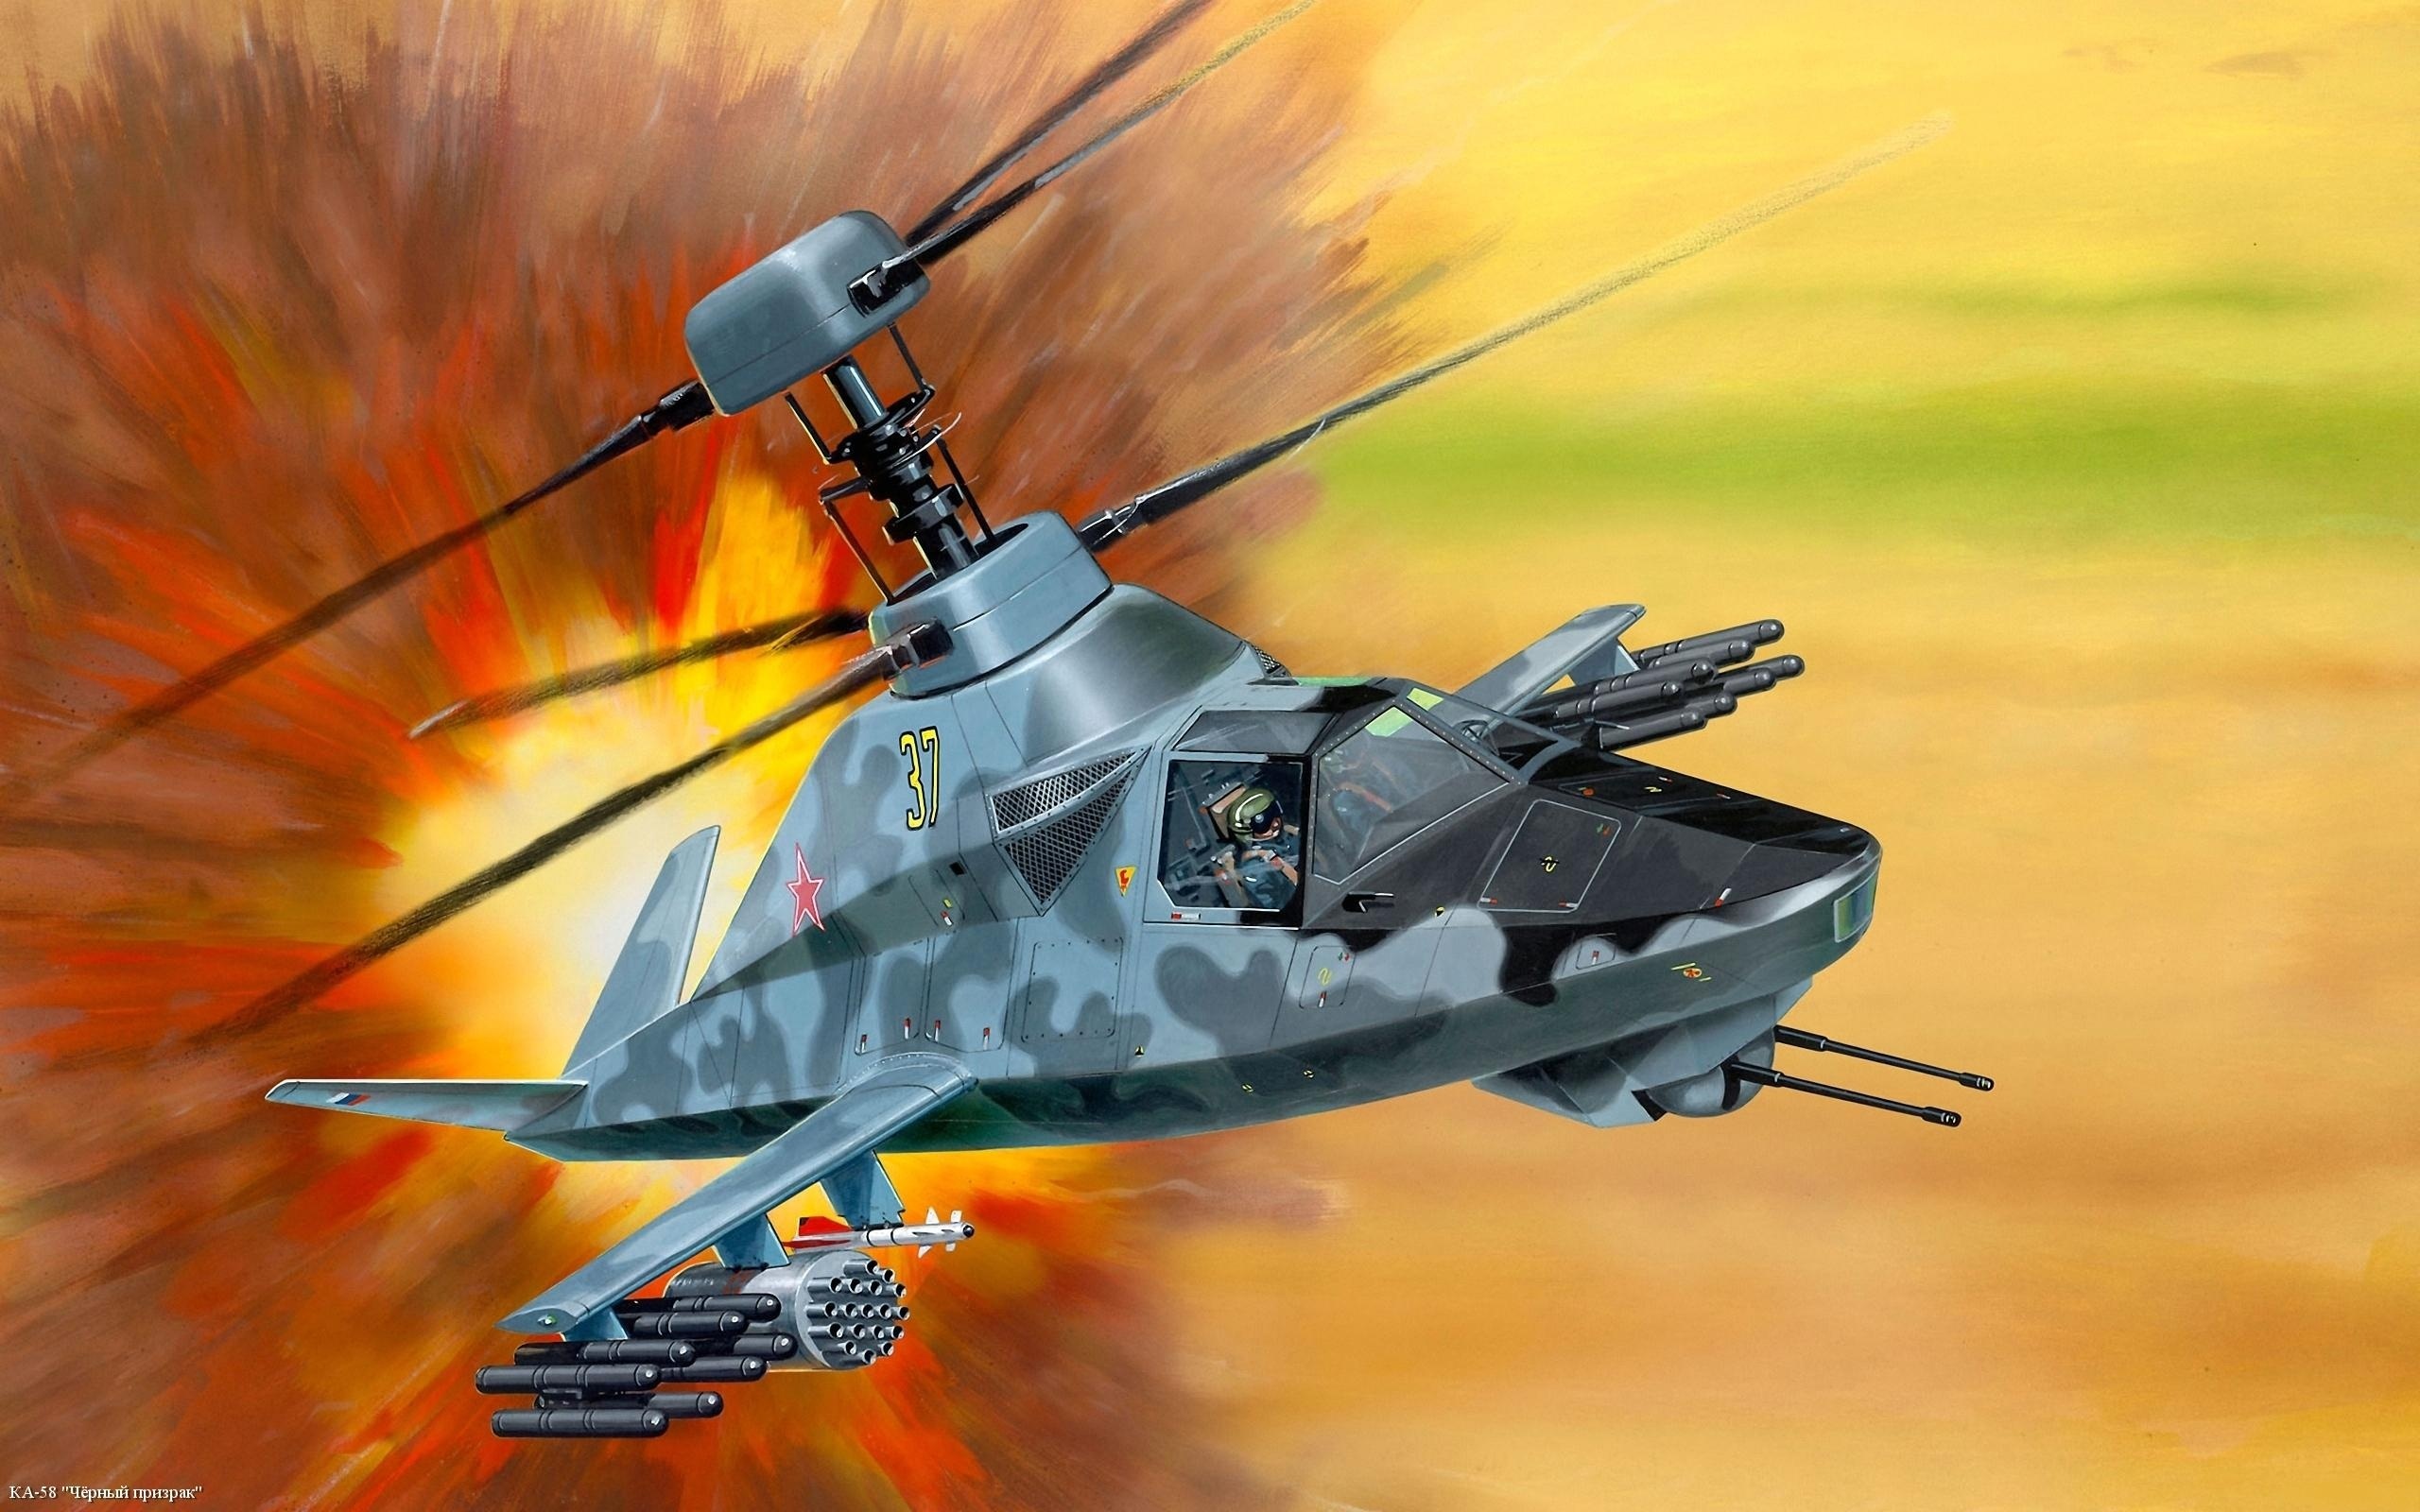 ka 58 stealth helicopter HD Wallpaper | Background Image | 2560x1600